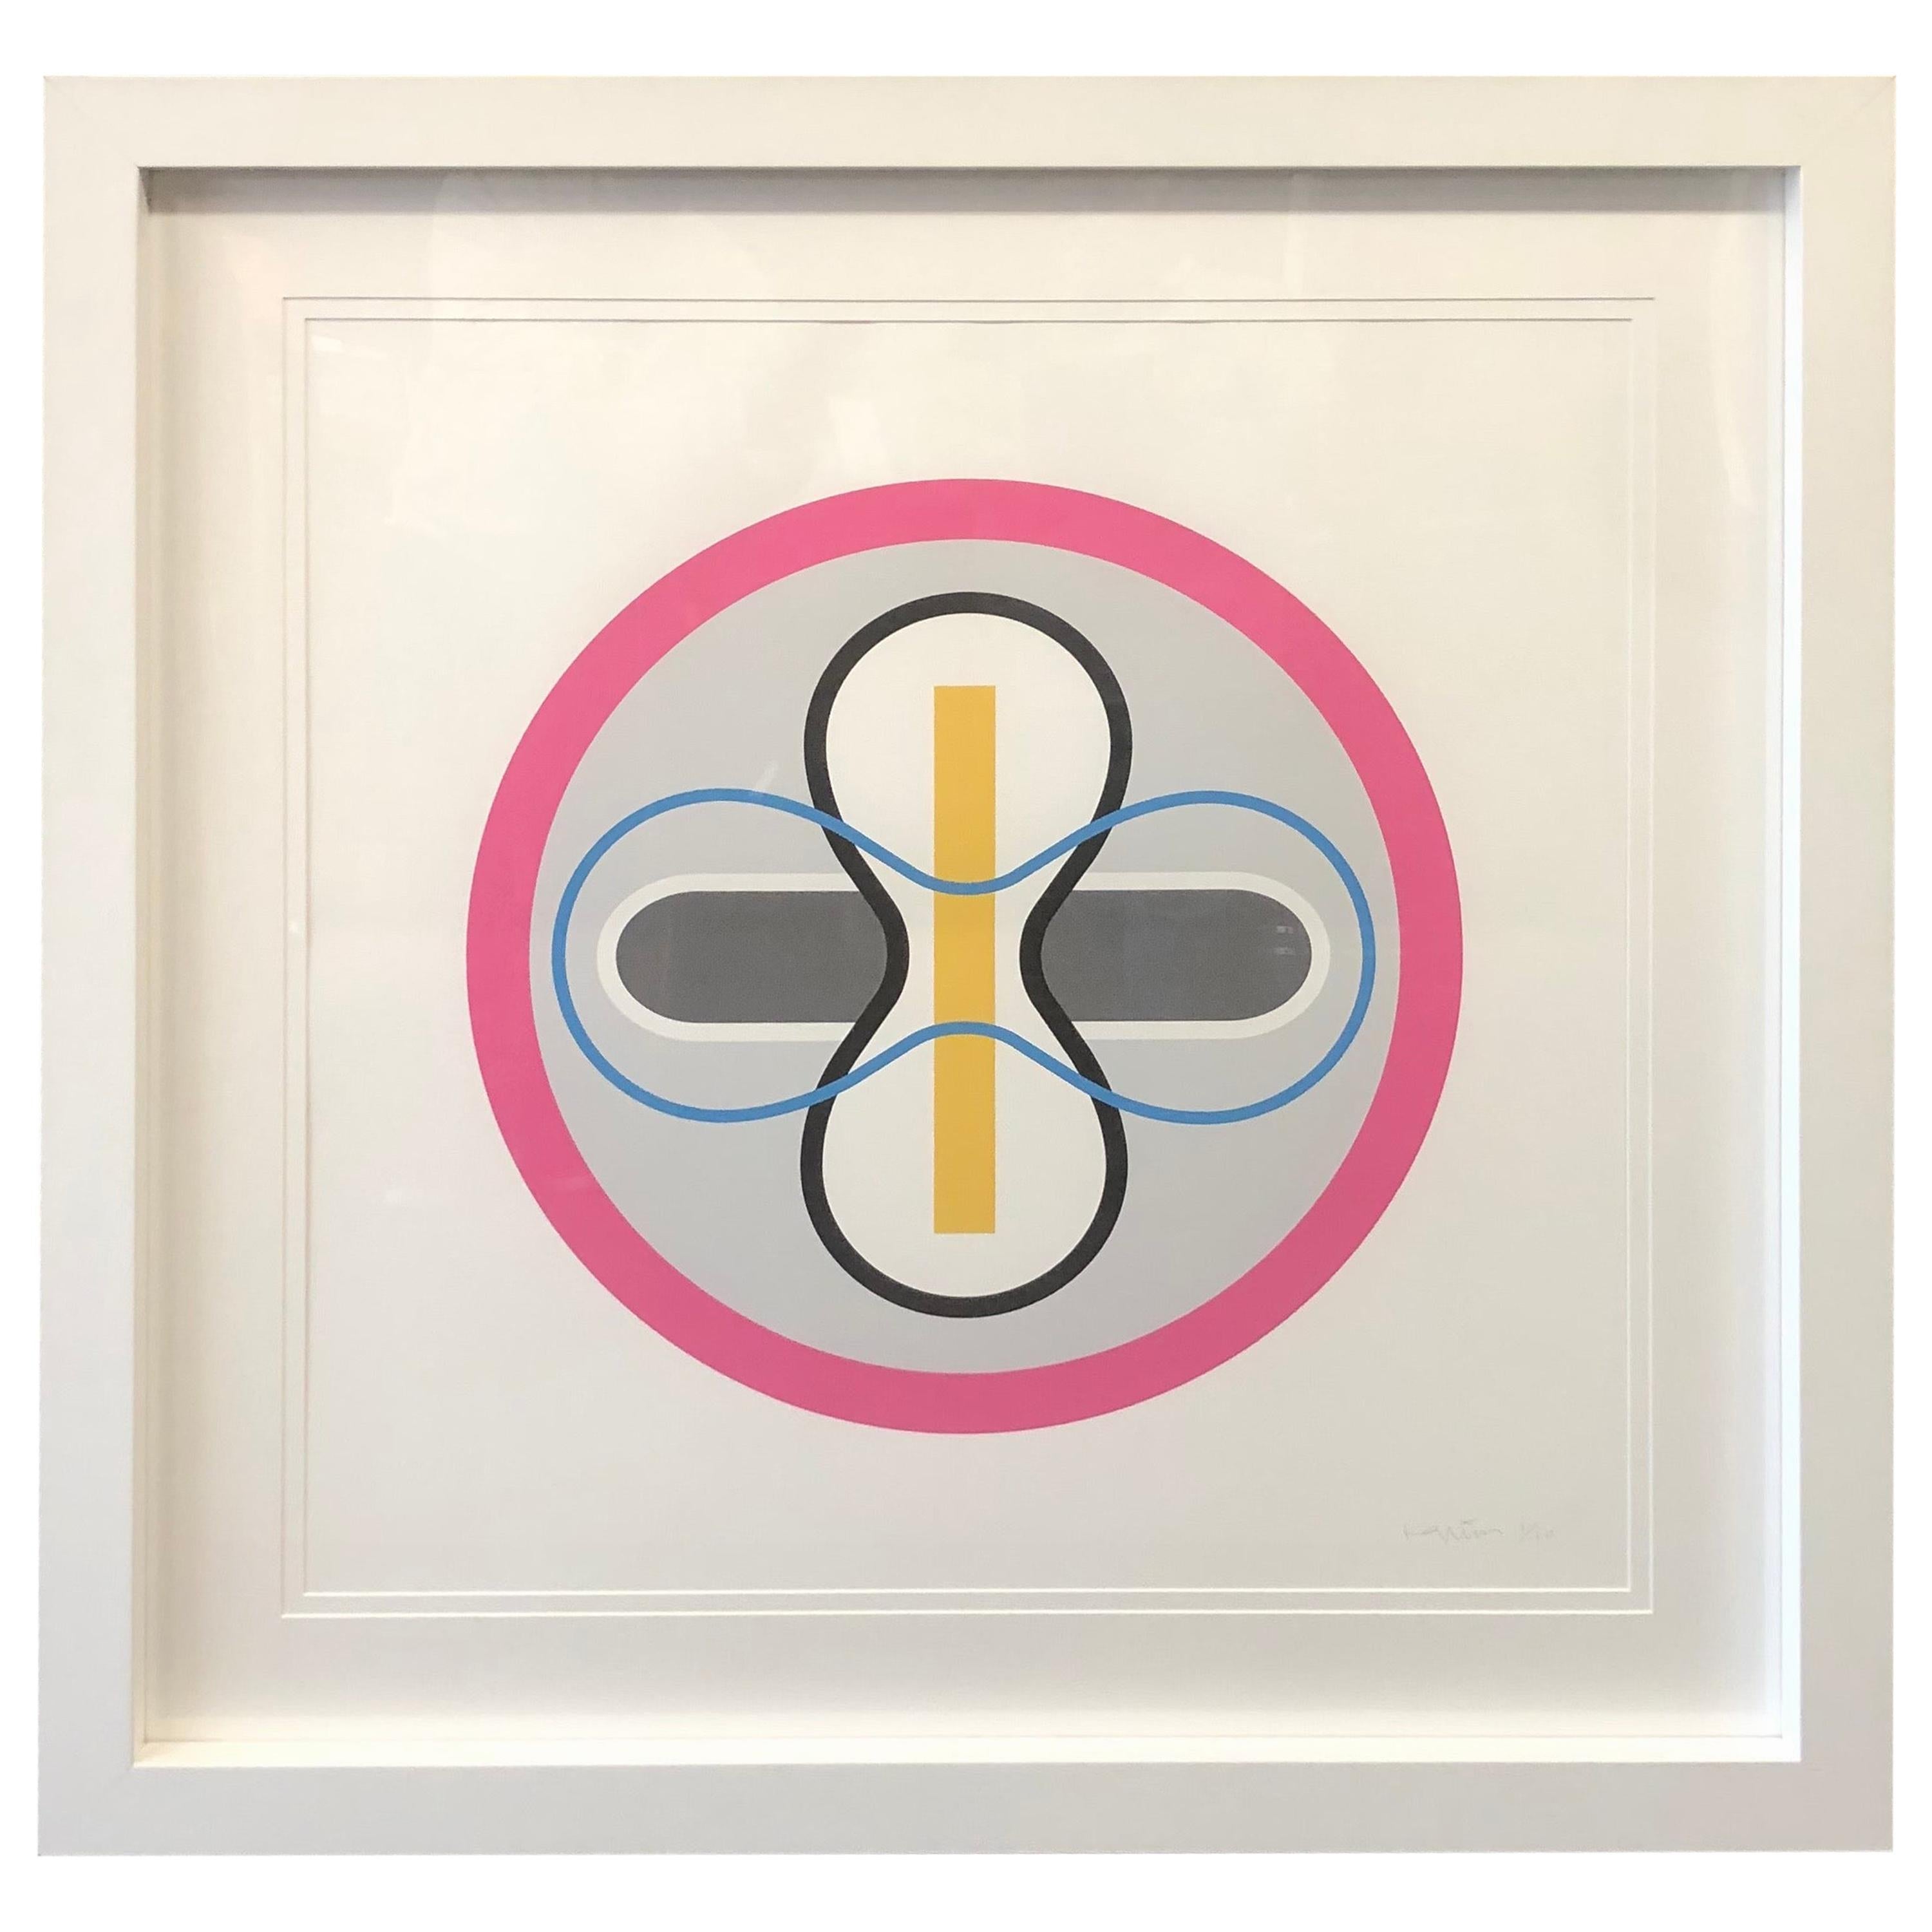 Large Colorful Geometric Lithograph Signed and Numbered by Karim Rashid